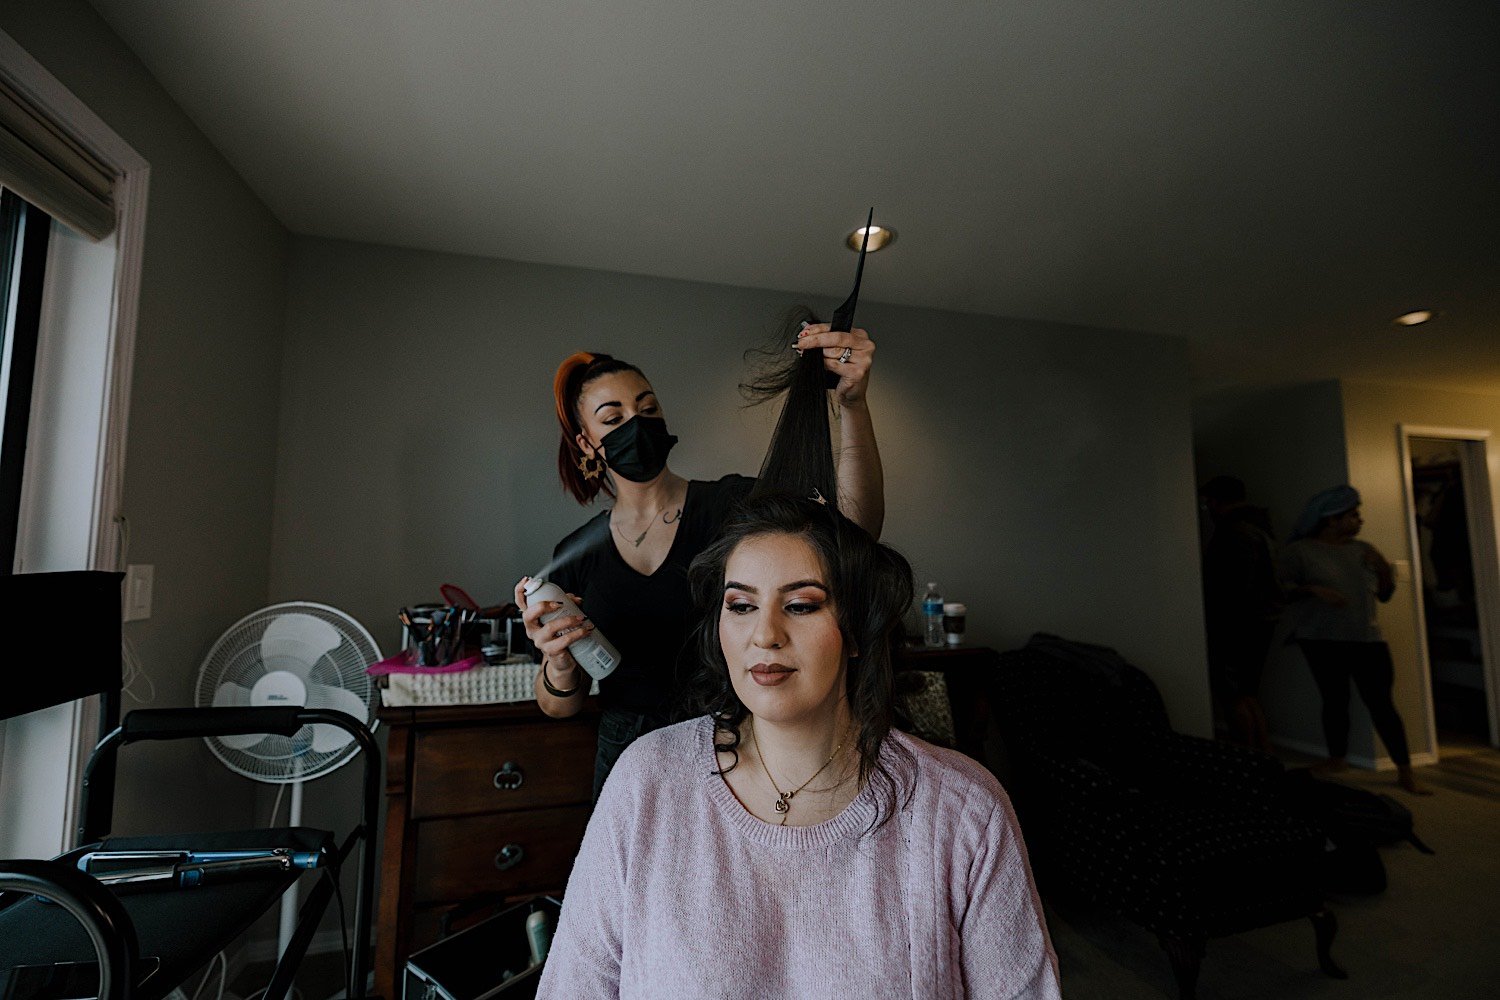 Hair stylist works on bride's hair before wedding day in hotel room